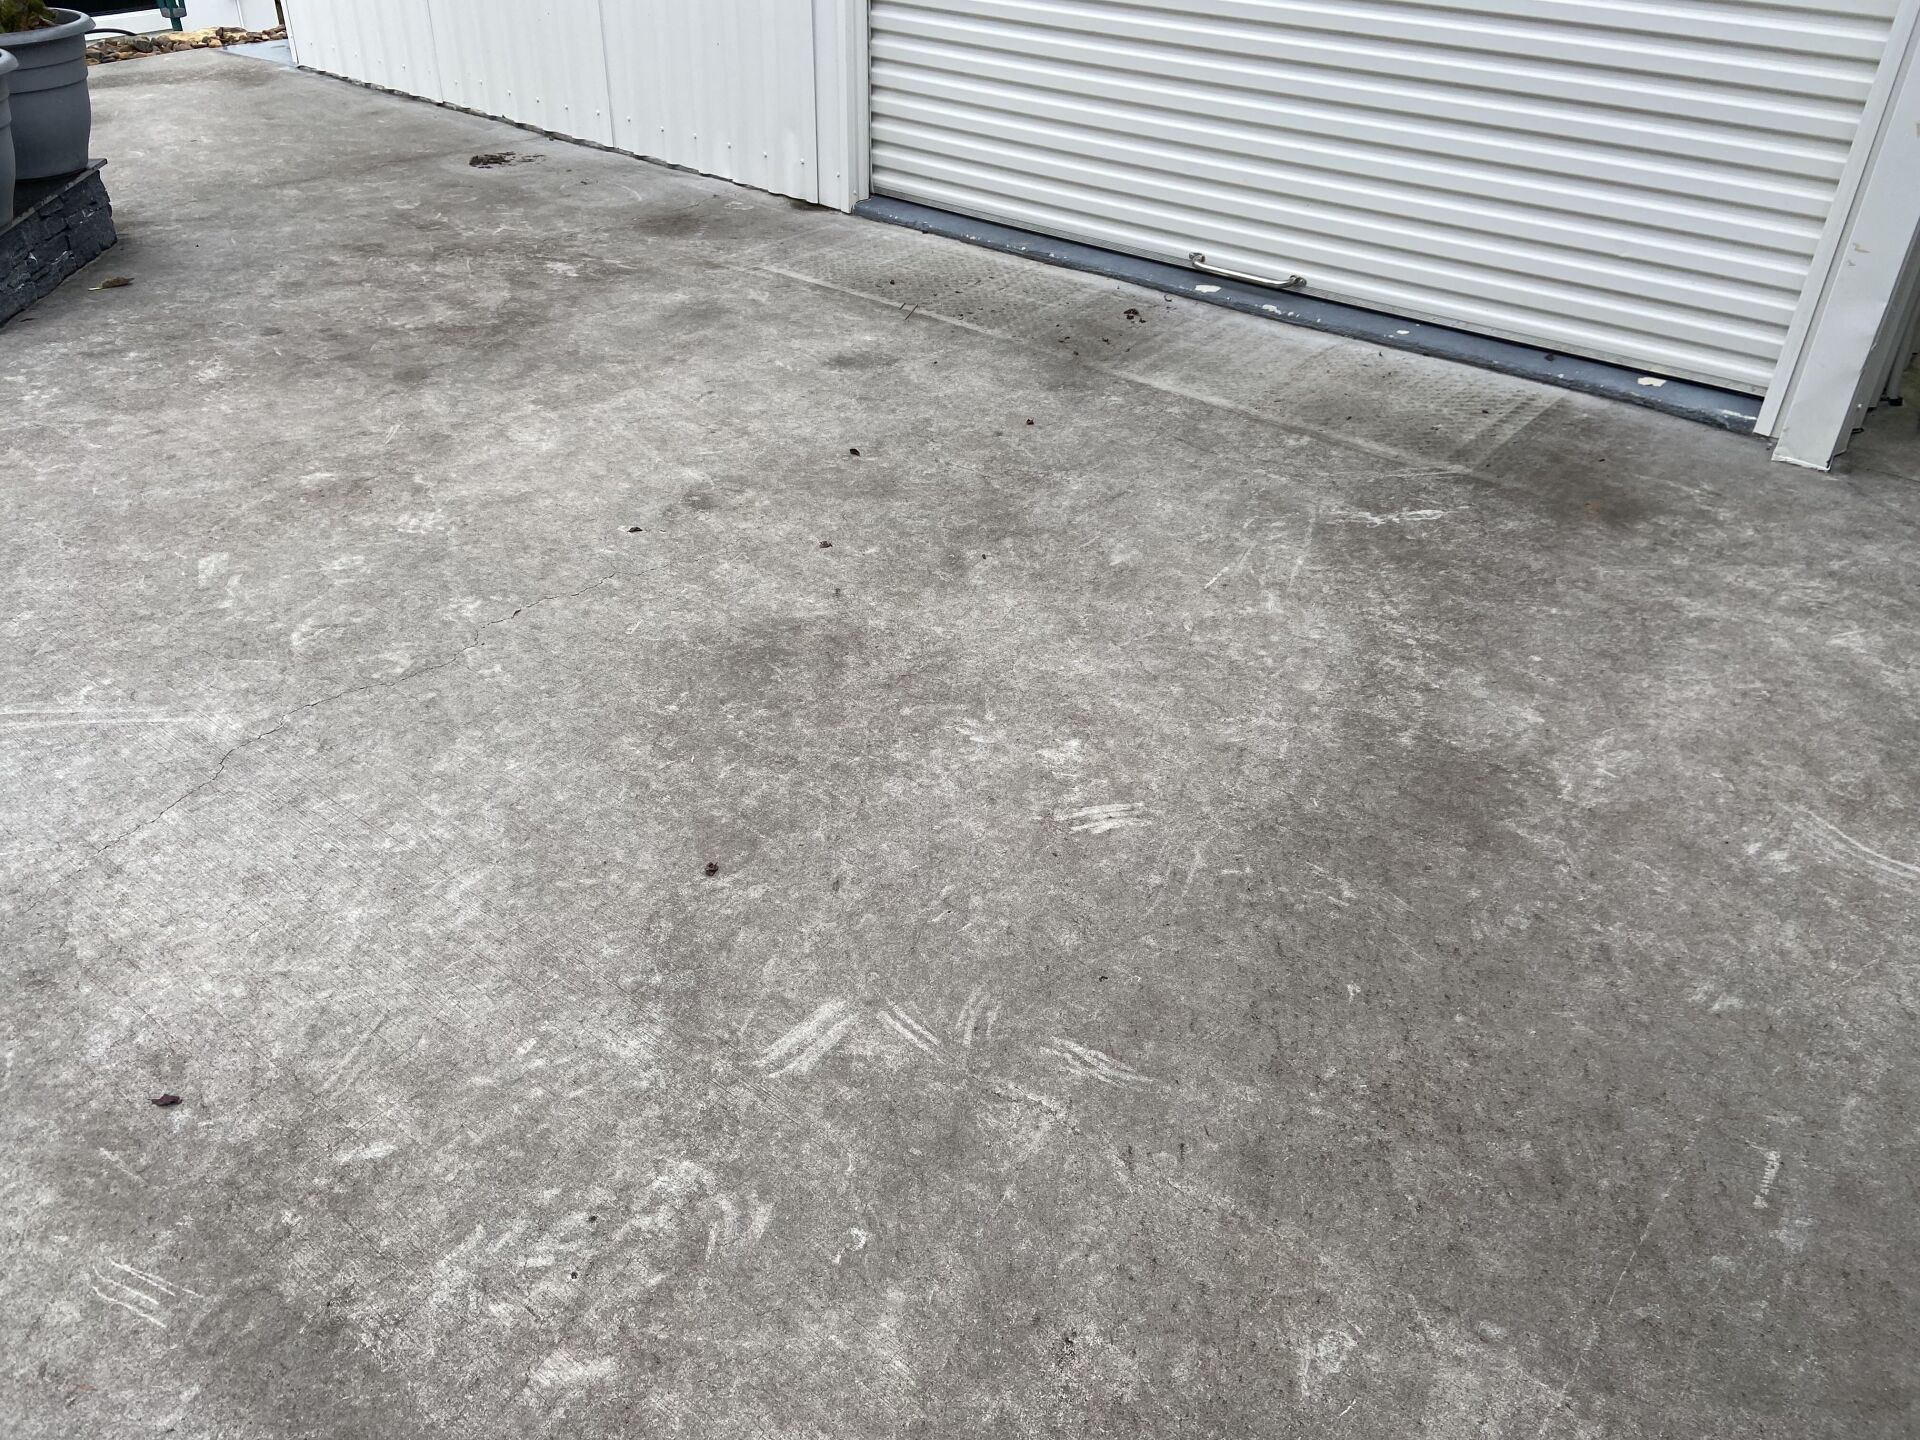 an image of a dirty concrete slab